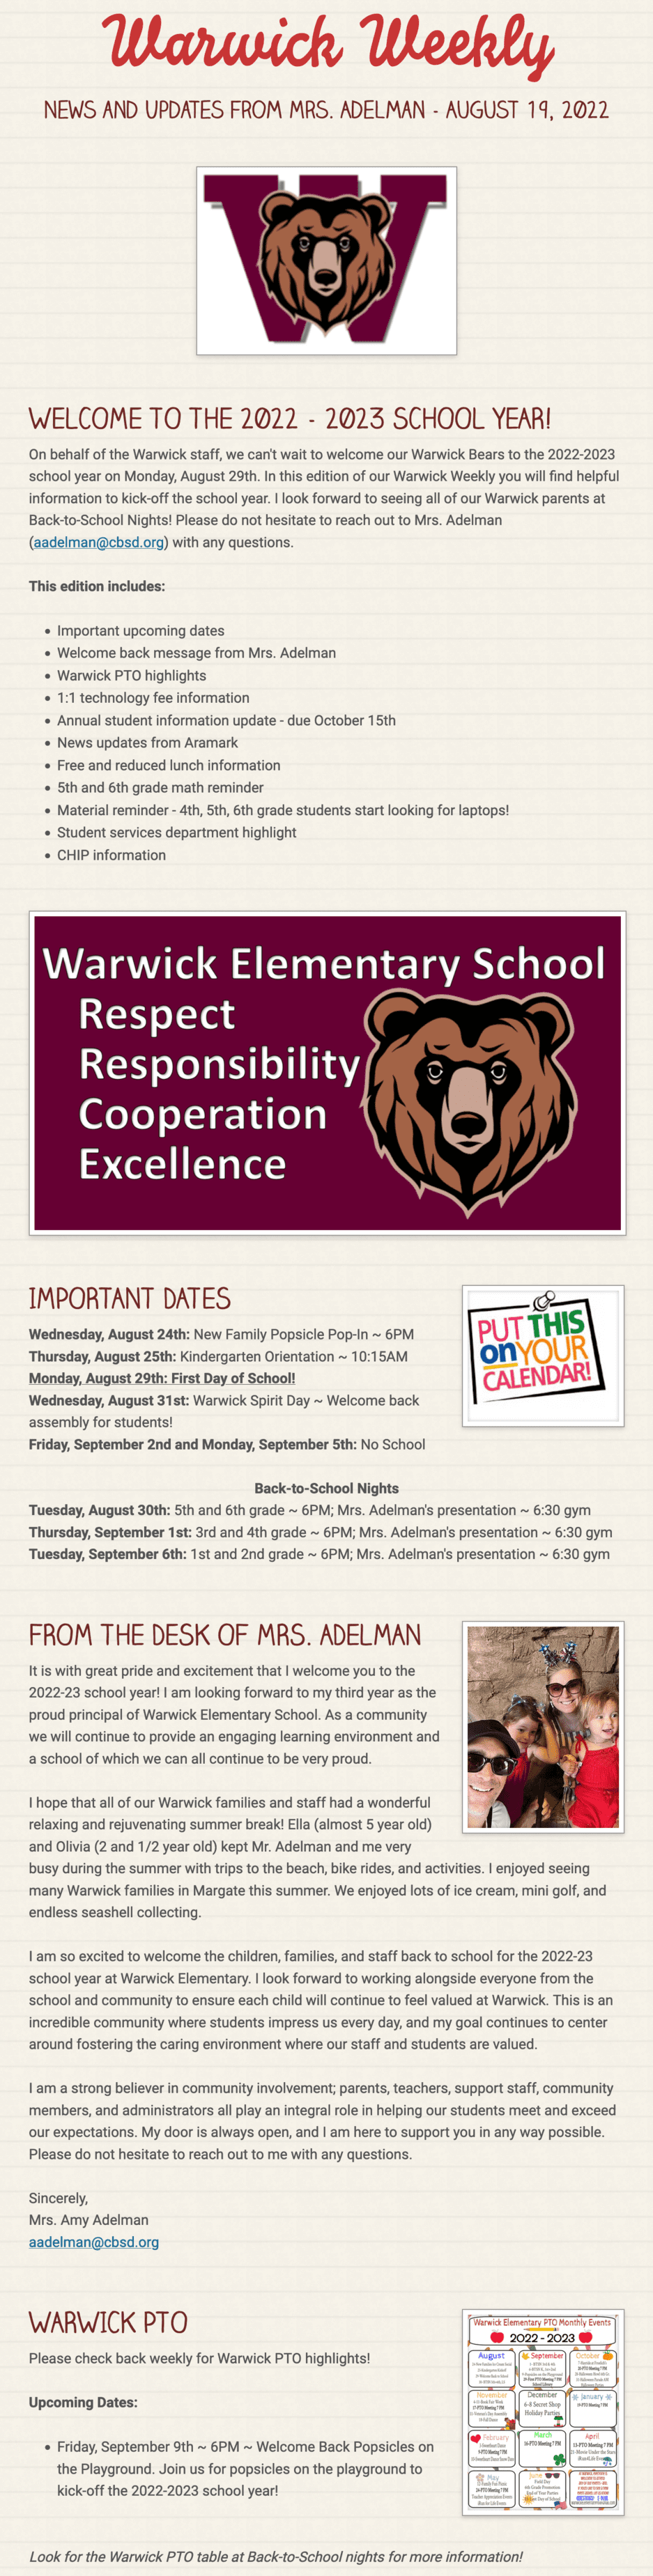 Warwick Weekly back-to-school email fragment with the school’s logo, calendar, and message from a teacher